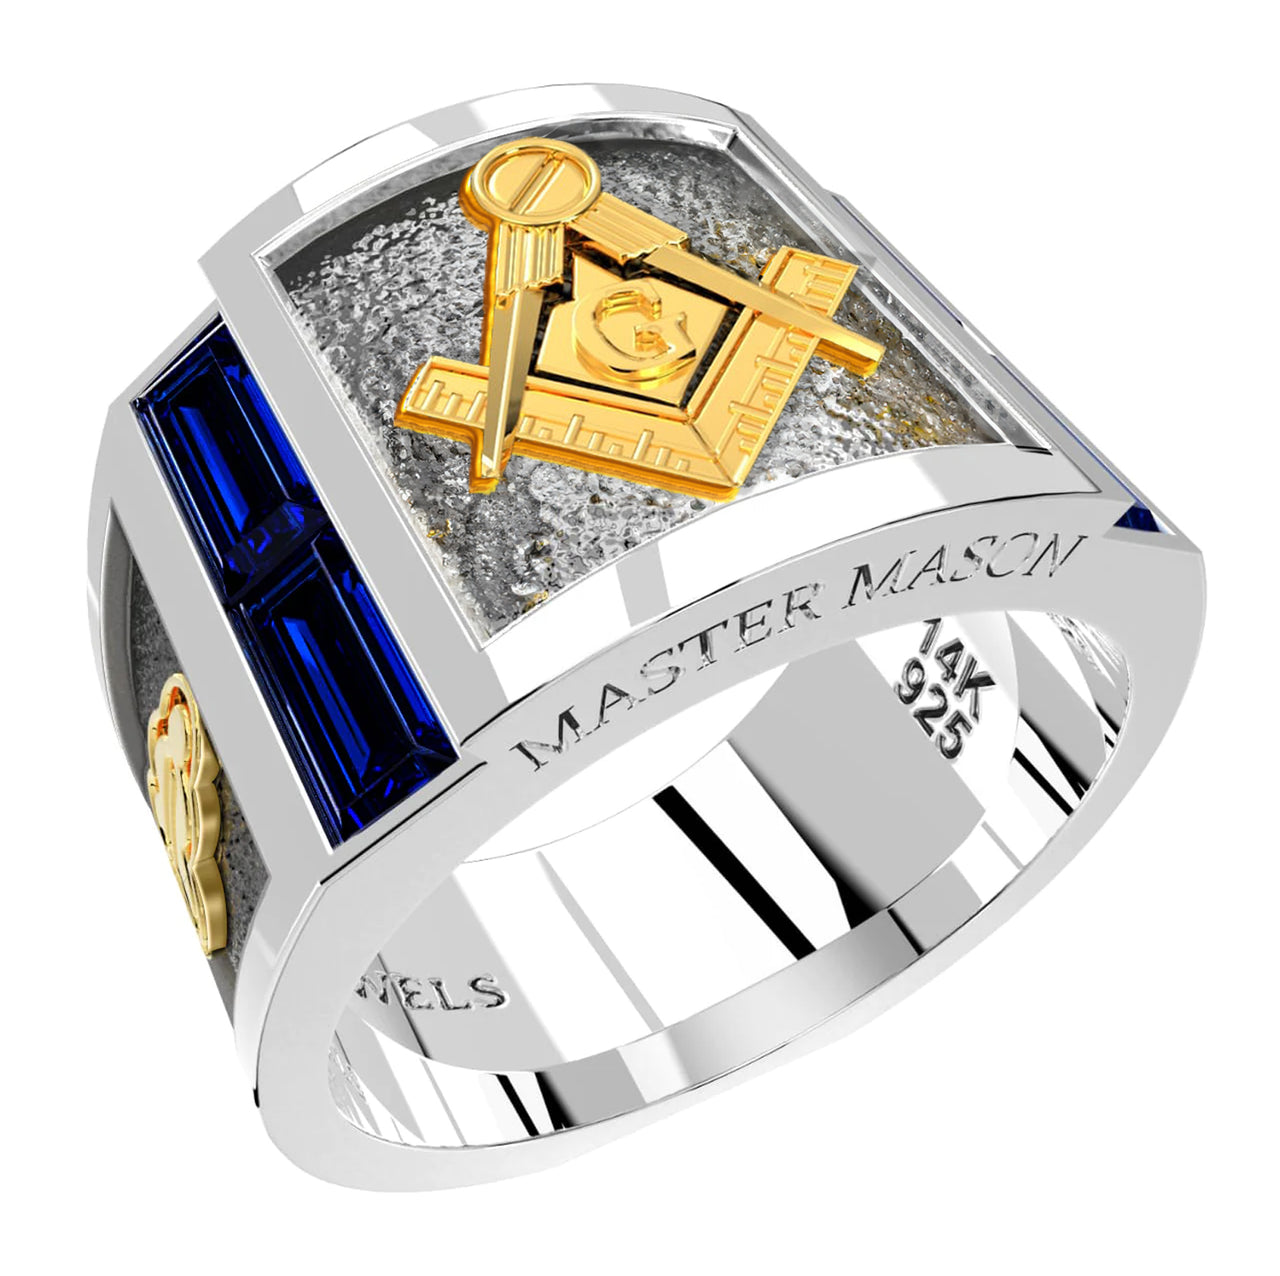 Men's Master Mason Two Tone 925 Sterling Silver and 14k Yellow Gold Synthetic Sapphire Ring